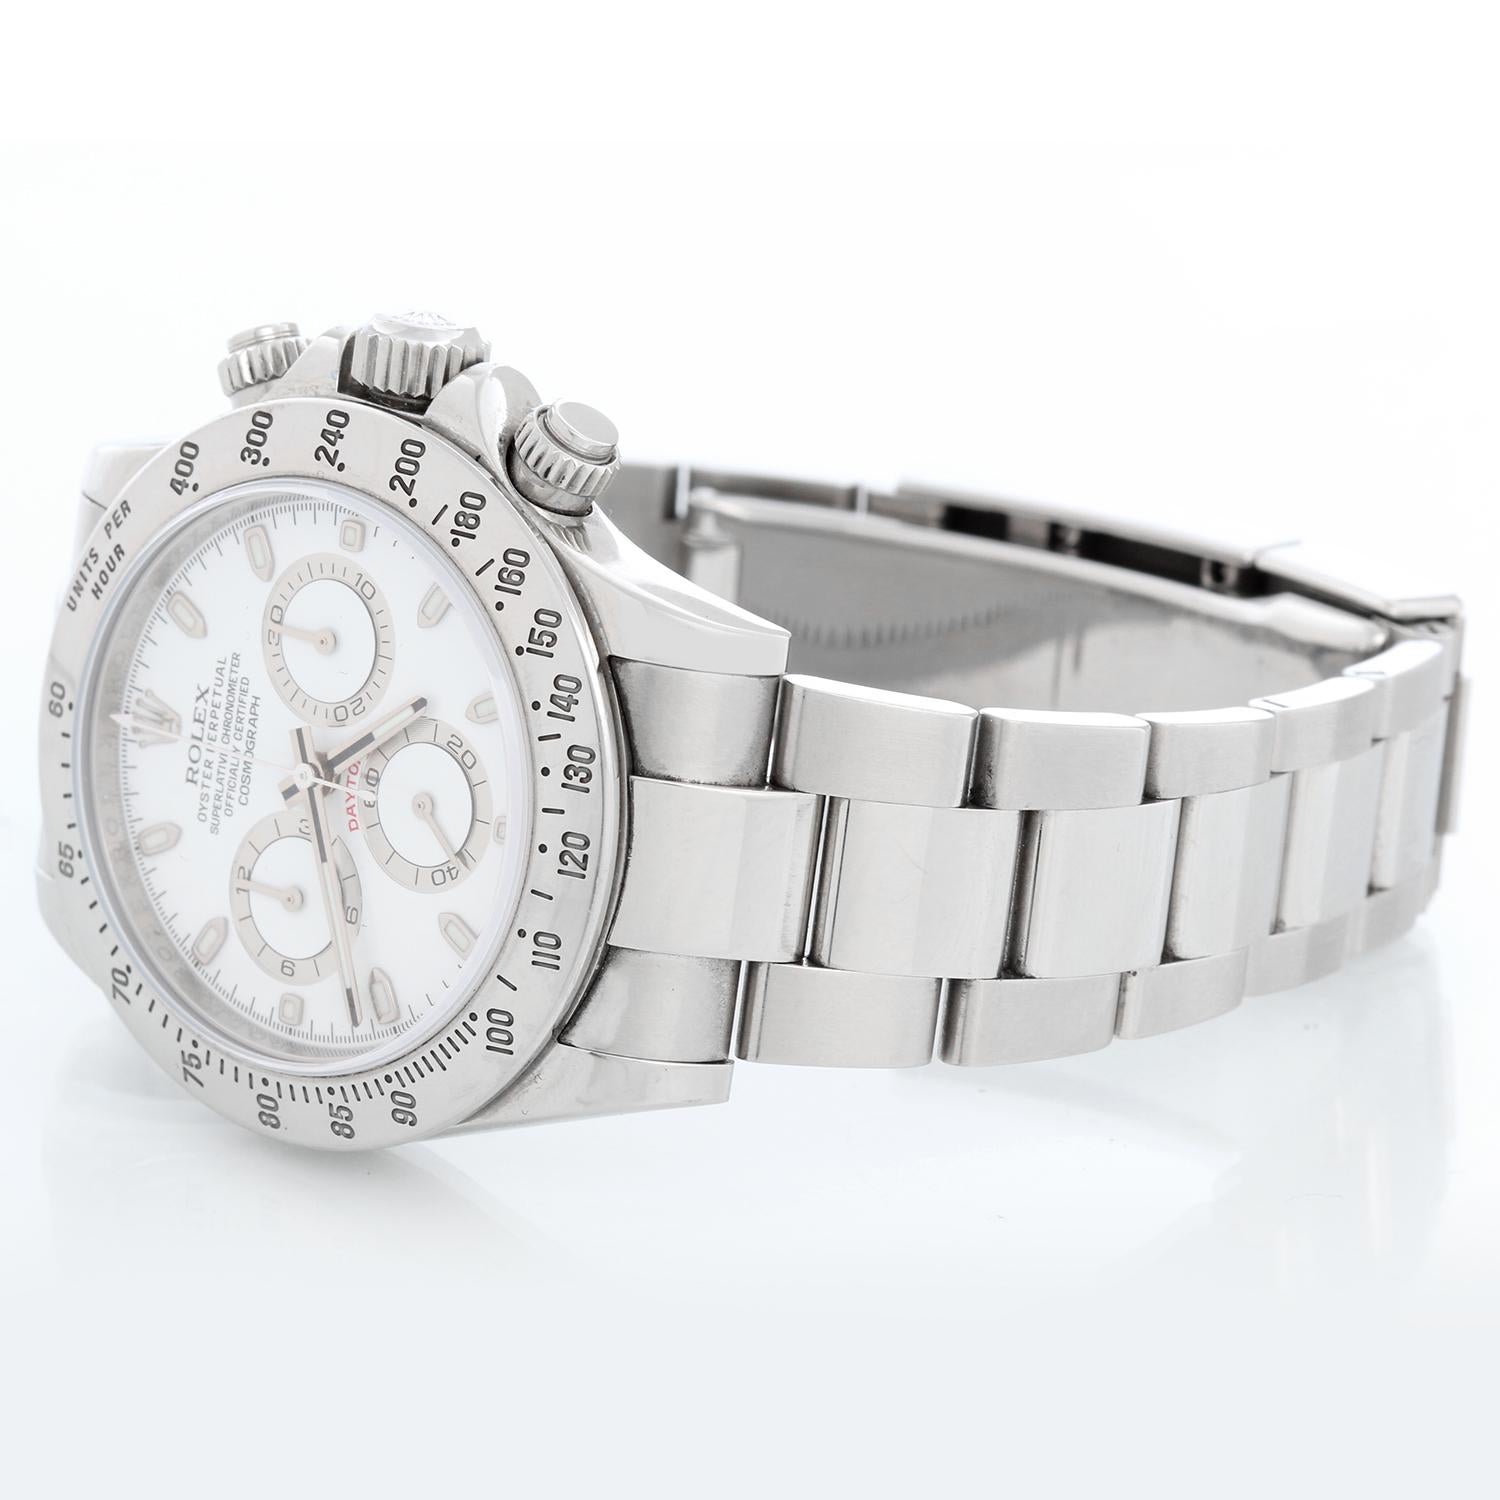 Rolex Daytona  Chronograph  Men's Stainless Steel Watch 116520 - Automatic winding, chronograph, 44 jewels, sapphire crystal. Stainless steel case (40mm diameter). White dial with White hour markers; hour, minute and seconds recorders. Stainless